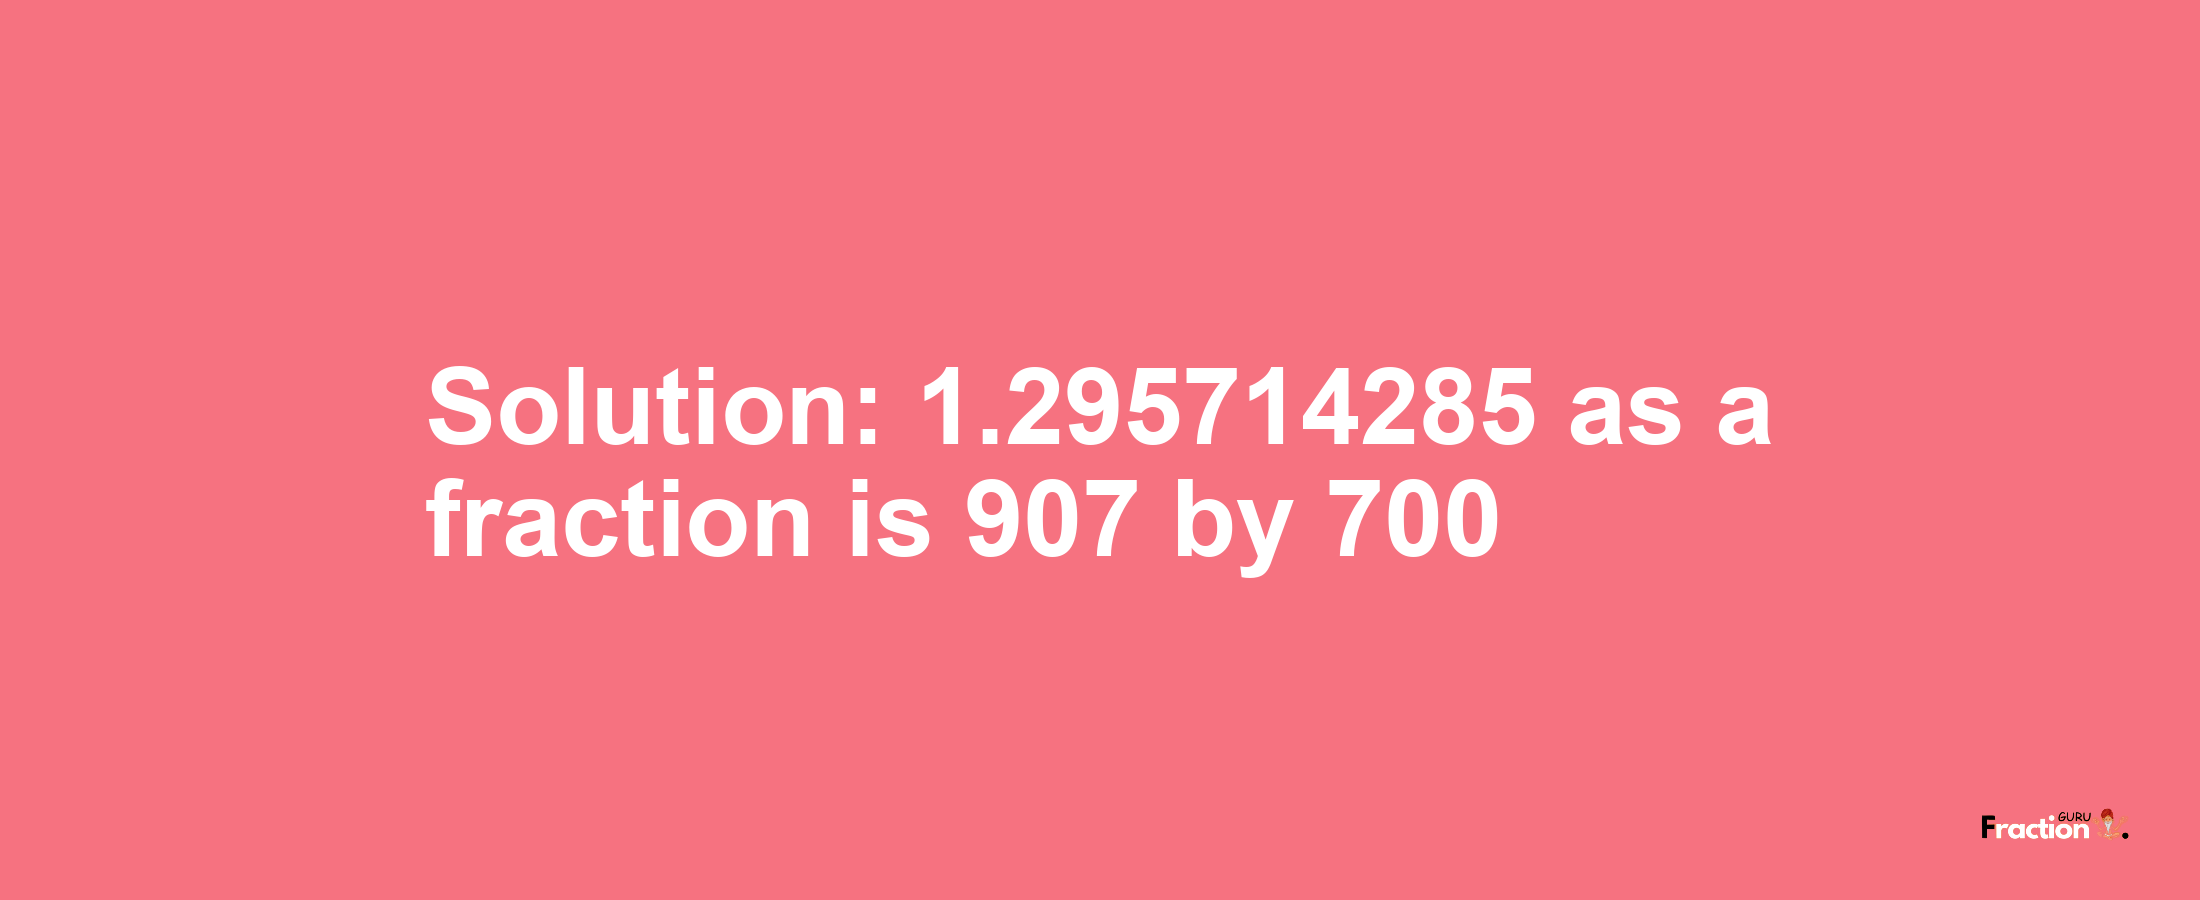 Solution:1.295714285 as a fraction is 907/700